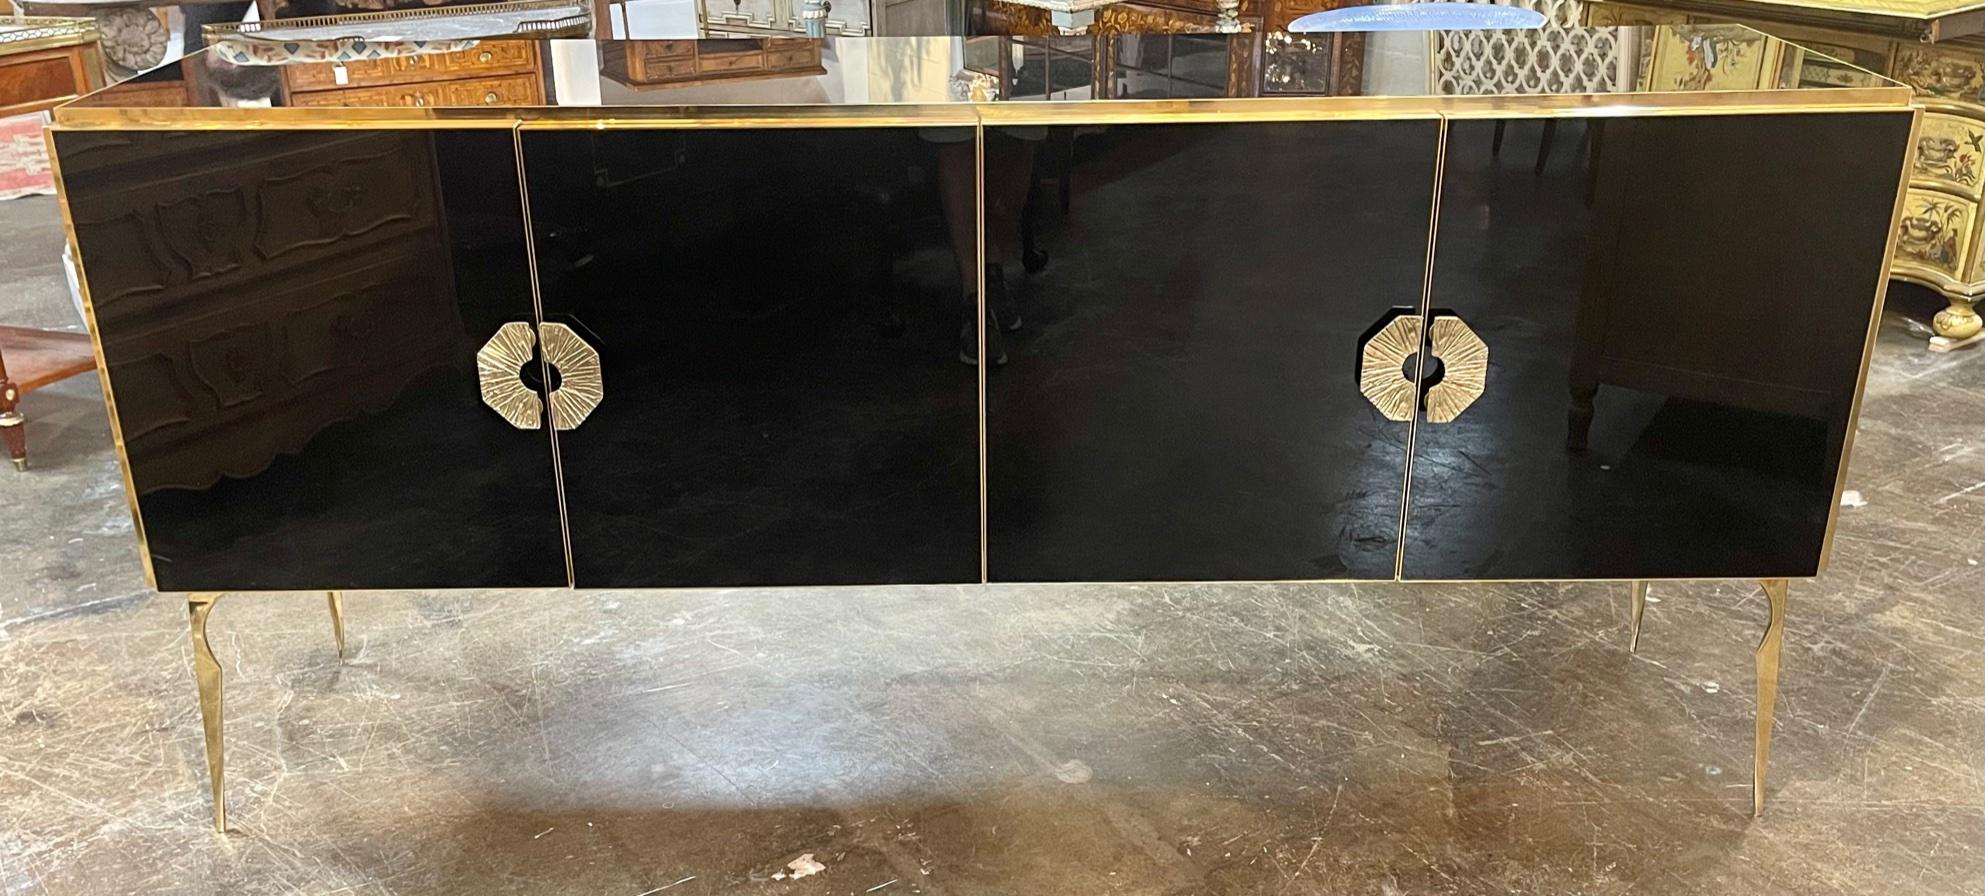 Modern Murano black glass and brass sideboard. Circa 2000. Perfect for todays transitional designs!